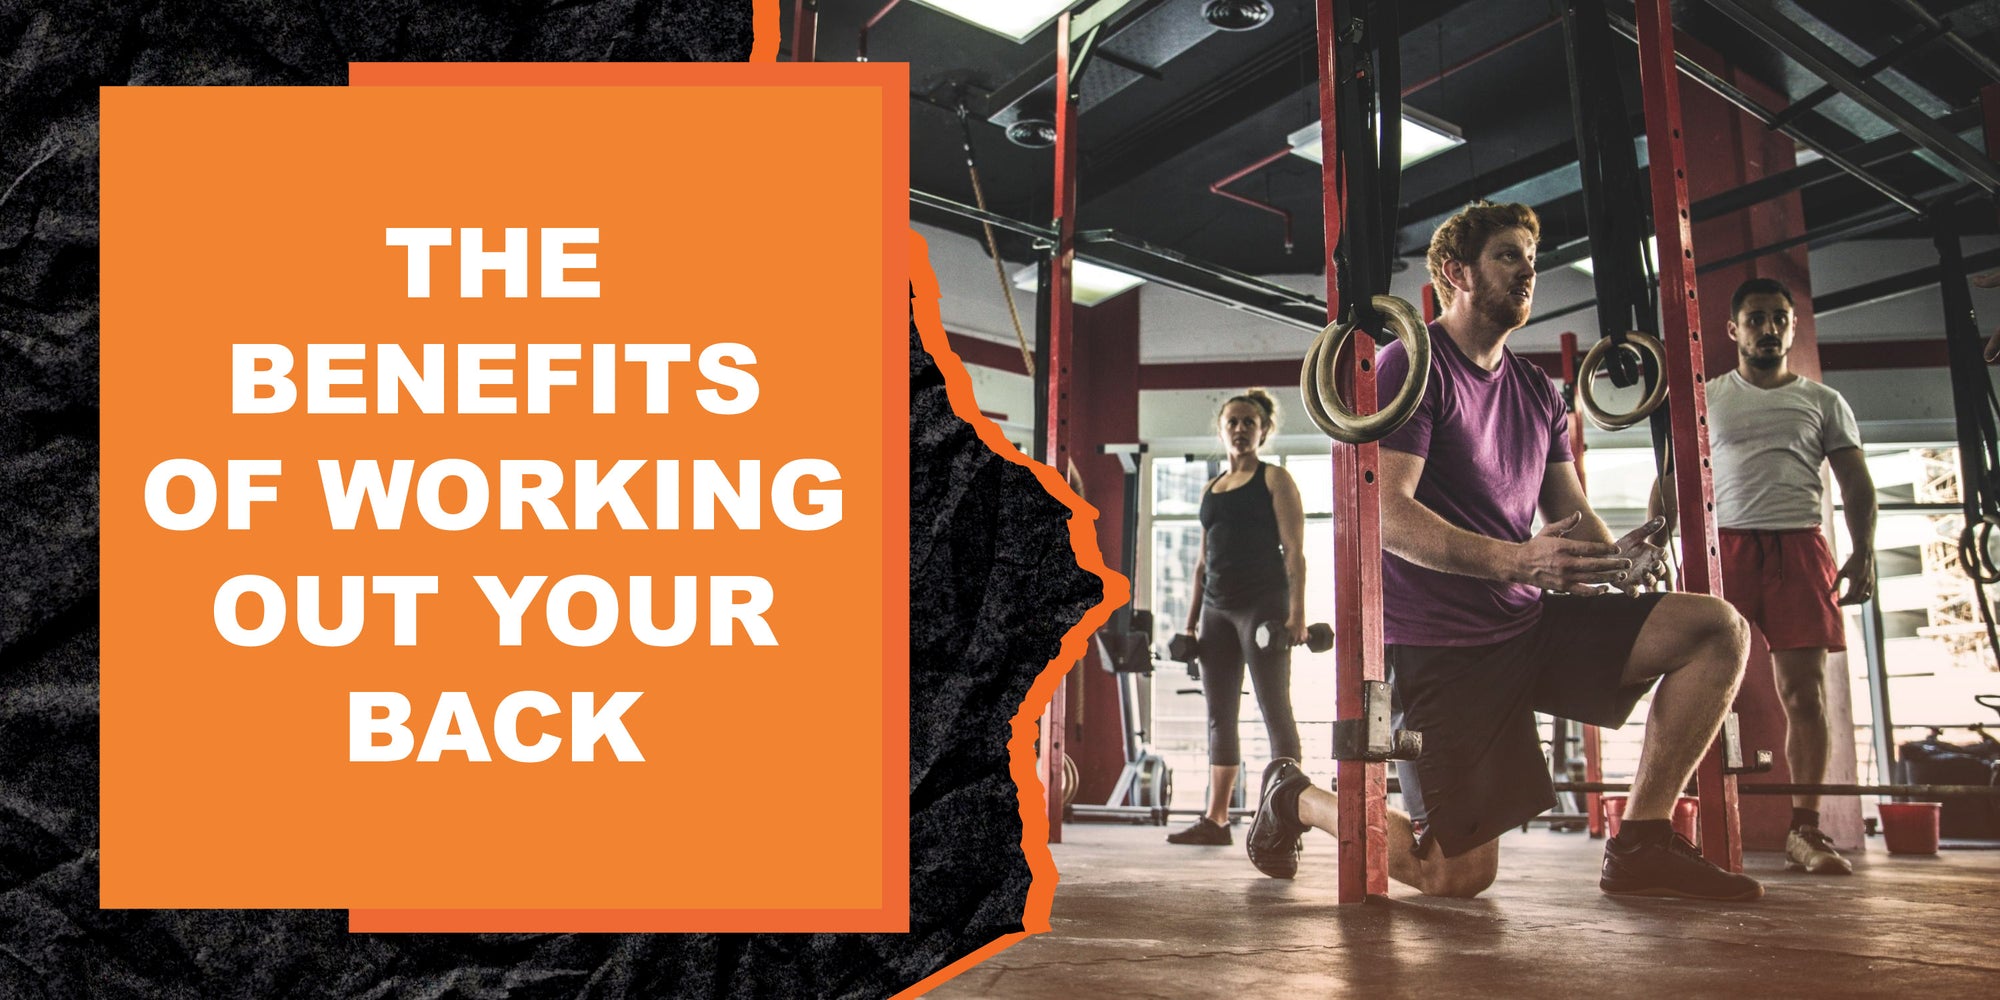 The Benefits of Working Out Your Back